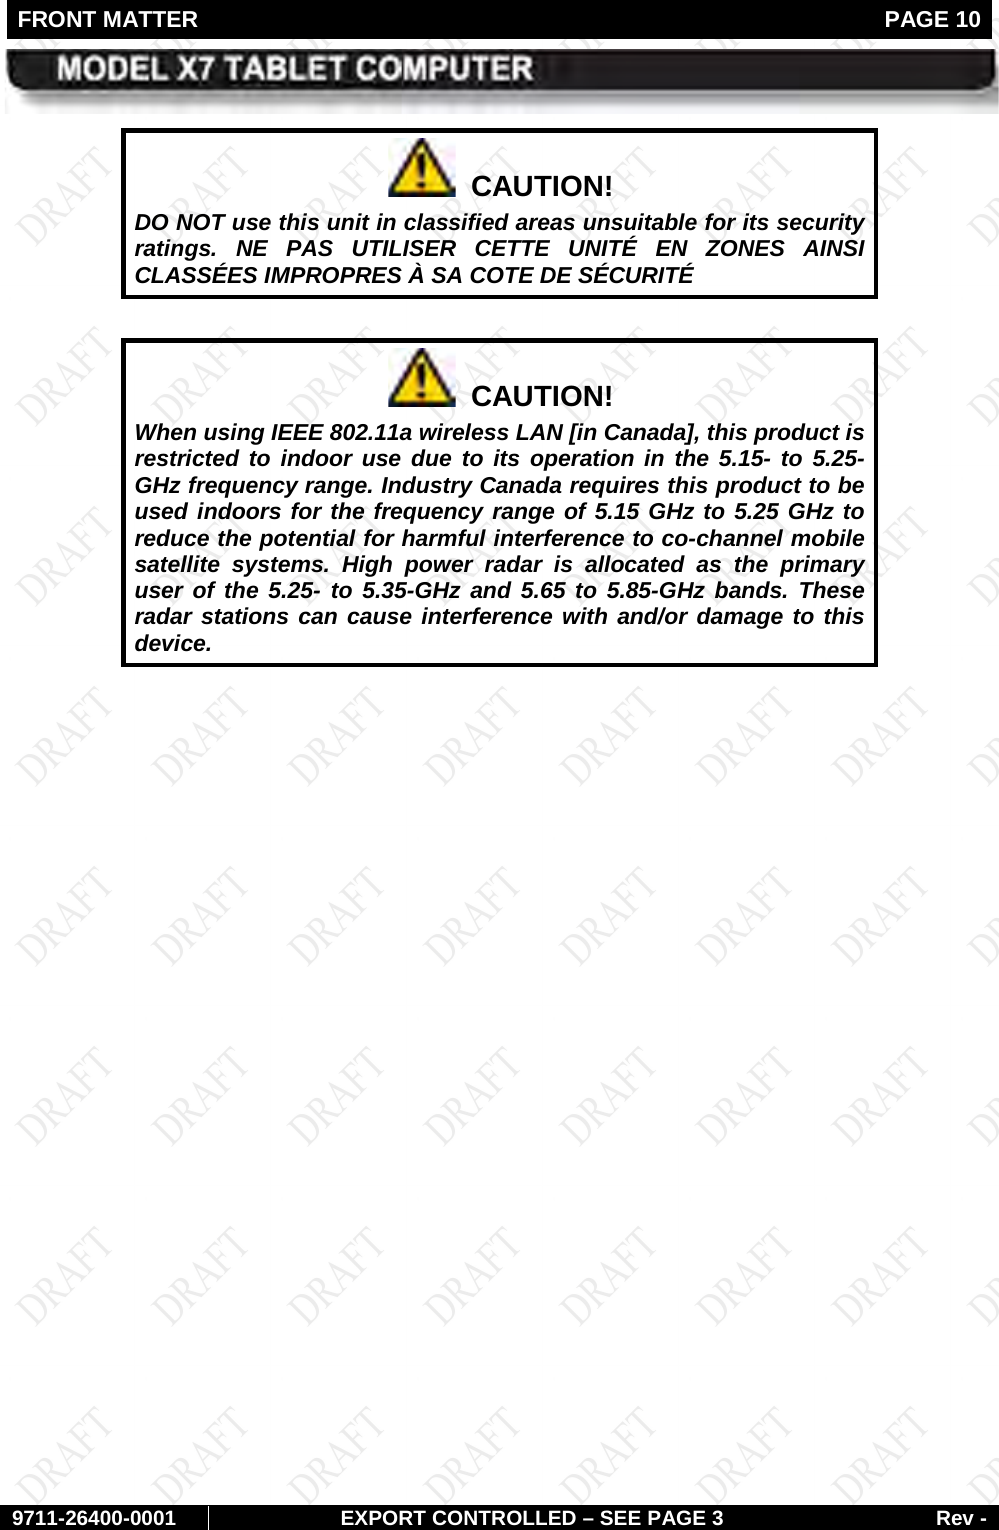 FRONT MATTER   PAGE 10        9711-26400-0001 EXPORT CONTROLLED – SEE PAGE 3 Rev -   CAUTION! DO NOT use this unit in classified areas unsuitable for its security ratings. NE PAS UTILISER CETTE UNITÉ EN ZONES AINSI CLASSÉES IMPROPRES À SA COTE DE SÉCURITÉ    CAUTION! When using IEEE 802.11a wireless LAN [in Canada], this product is restricted to indoor use due to its operation in the 5.15- to 5.25-GHz frequency range. Industry Canada requires this product to be used indoors for the frequency range of 5.15 GHz to 5.25 GHz to reduce the potential for harmful interference to co-channel mobile satellite systems. High power radar is allocated as the primary user of the 5.25- to 5.35-GHz and 5.65 to 5.85-GHz bands. These radar stations can cause interference with and/or damage to this device.     